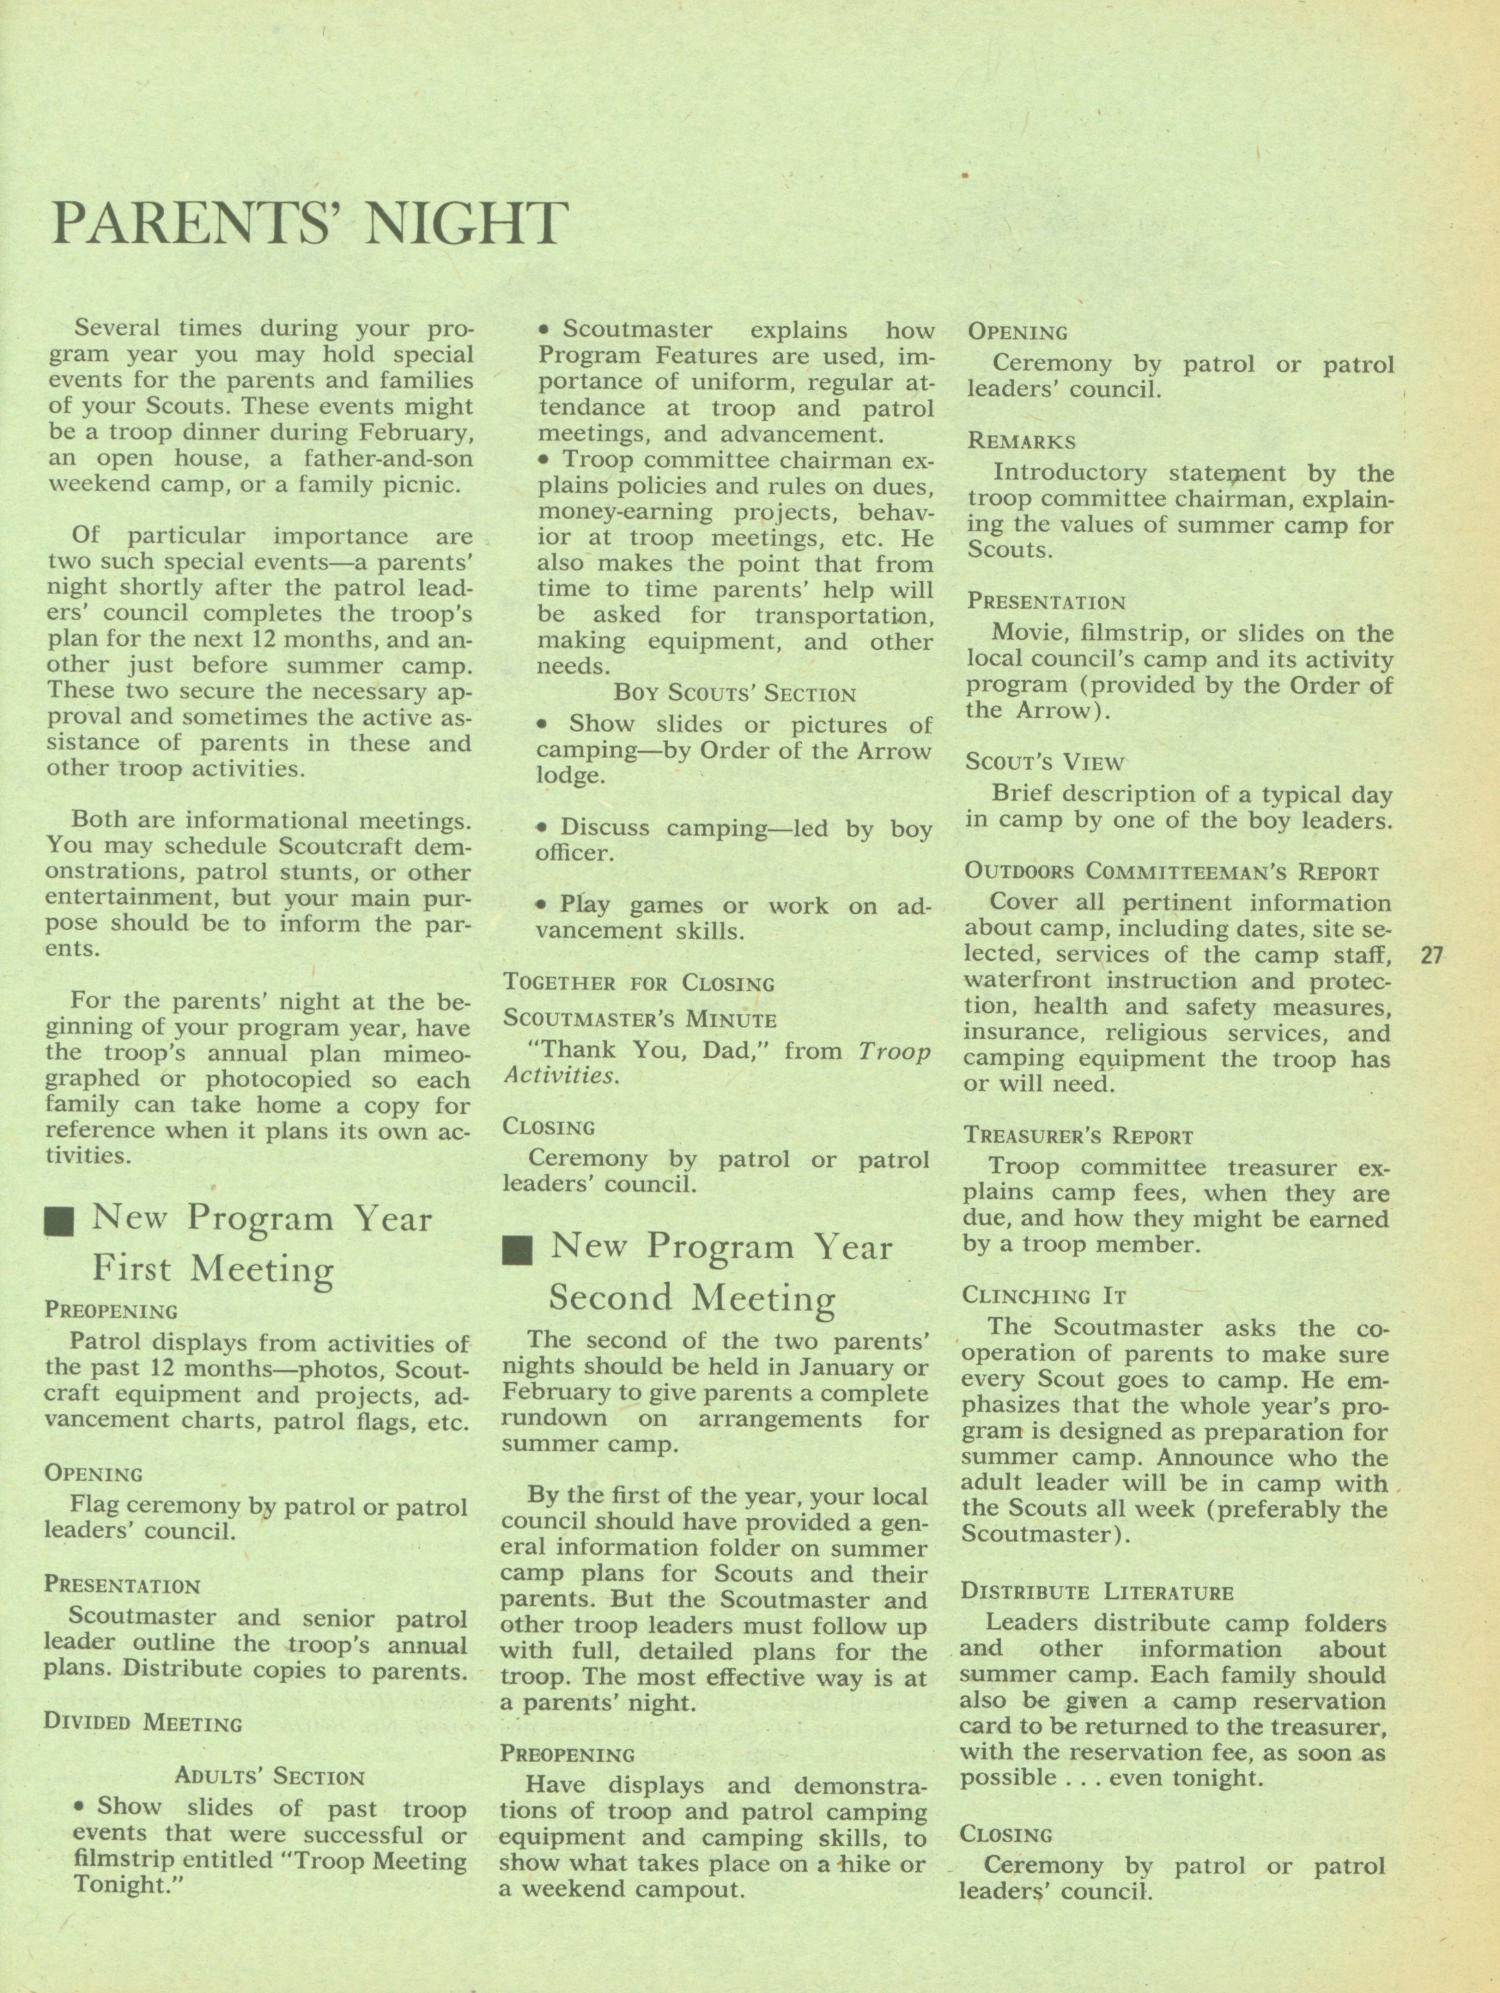 Scouting, Volume 59, Number 4, July-August 1971
                                                
                                                    27
                                                